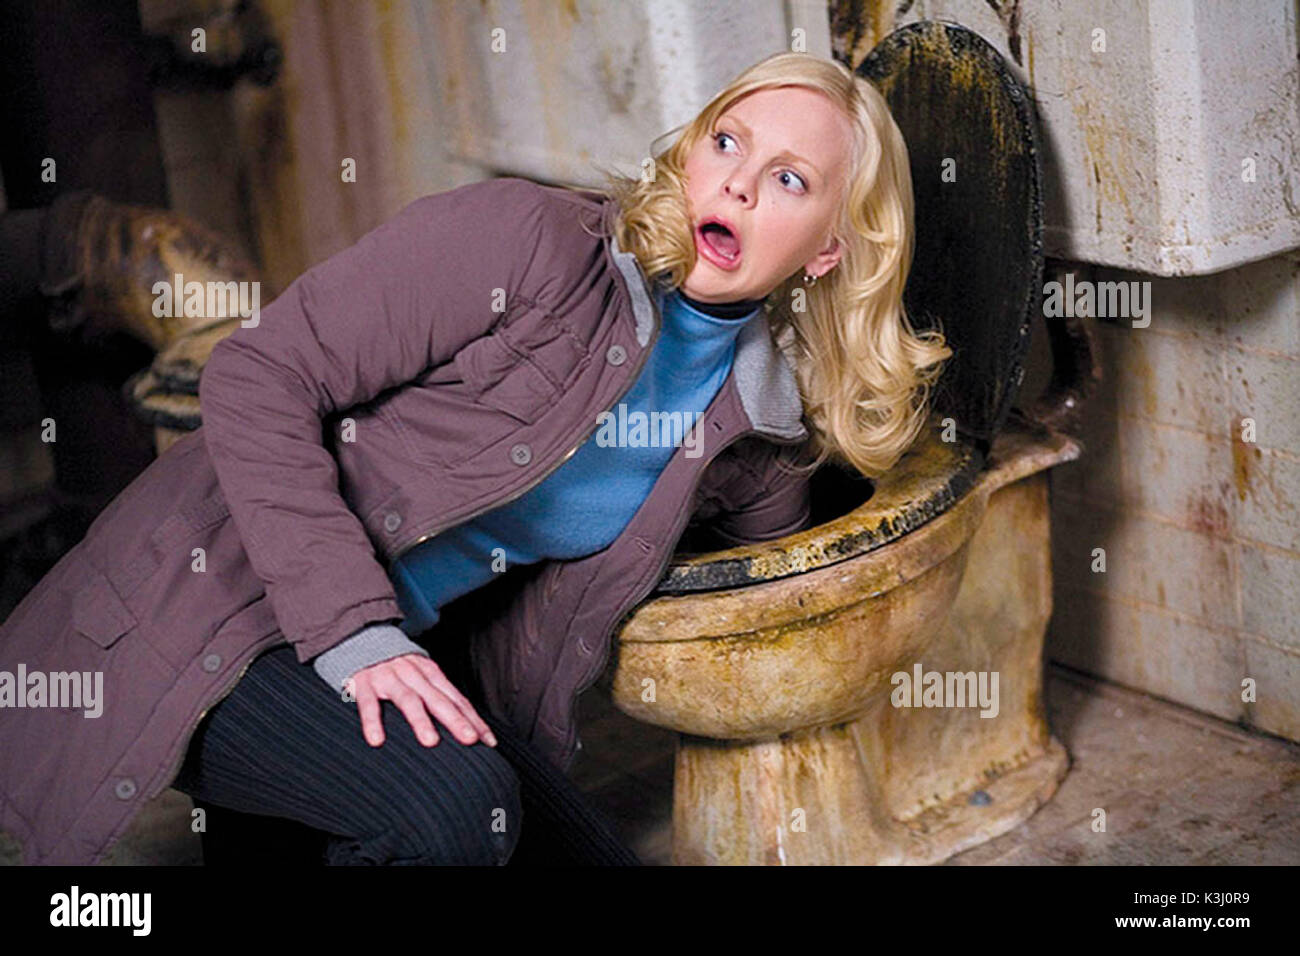 SCARY MOVIE 4 ANNA FARIS spoofing Saw SCARY MOVIE 4 ANNA FARIS spoofing Saw SCARY MOVIE 4 [US 2006] ANNA FARIS spoofing Saw     Date: 2006 Stock Photo